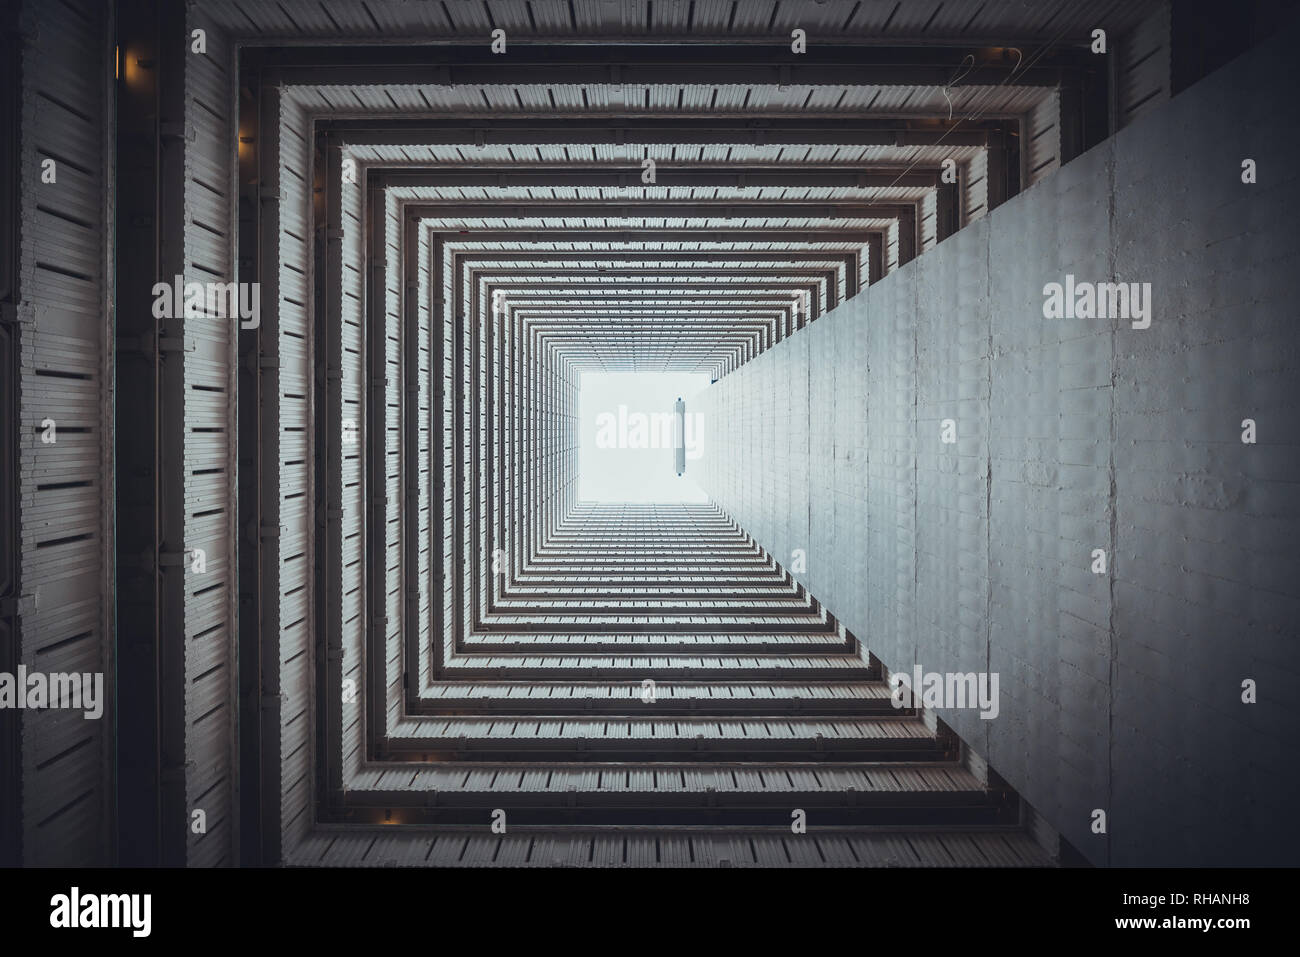 Isometric square bottom view from inside building. Architecture art, design abstract background, or construction industry concept Stock Photo